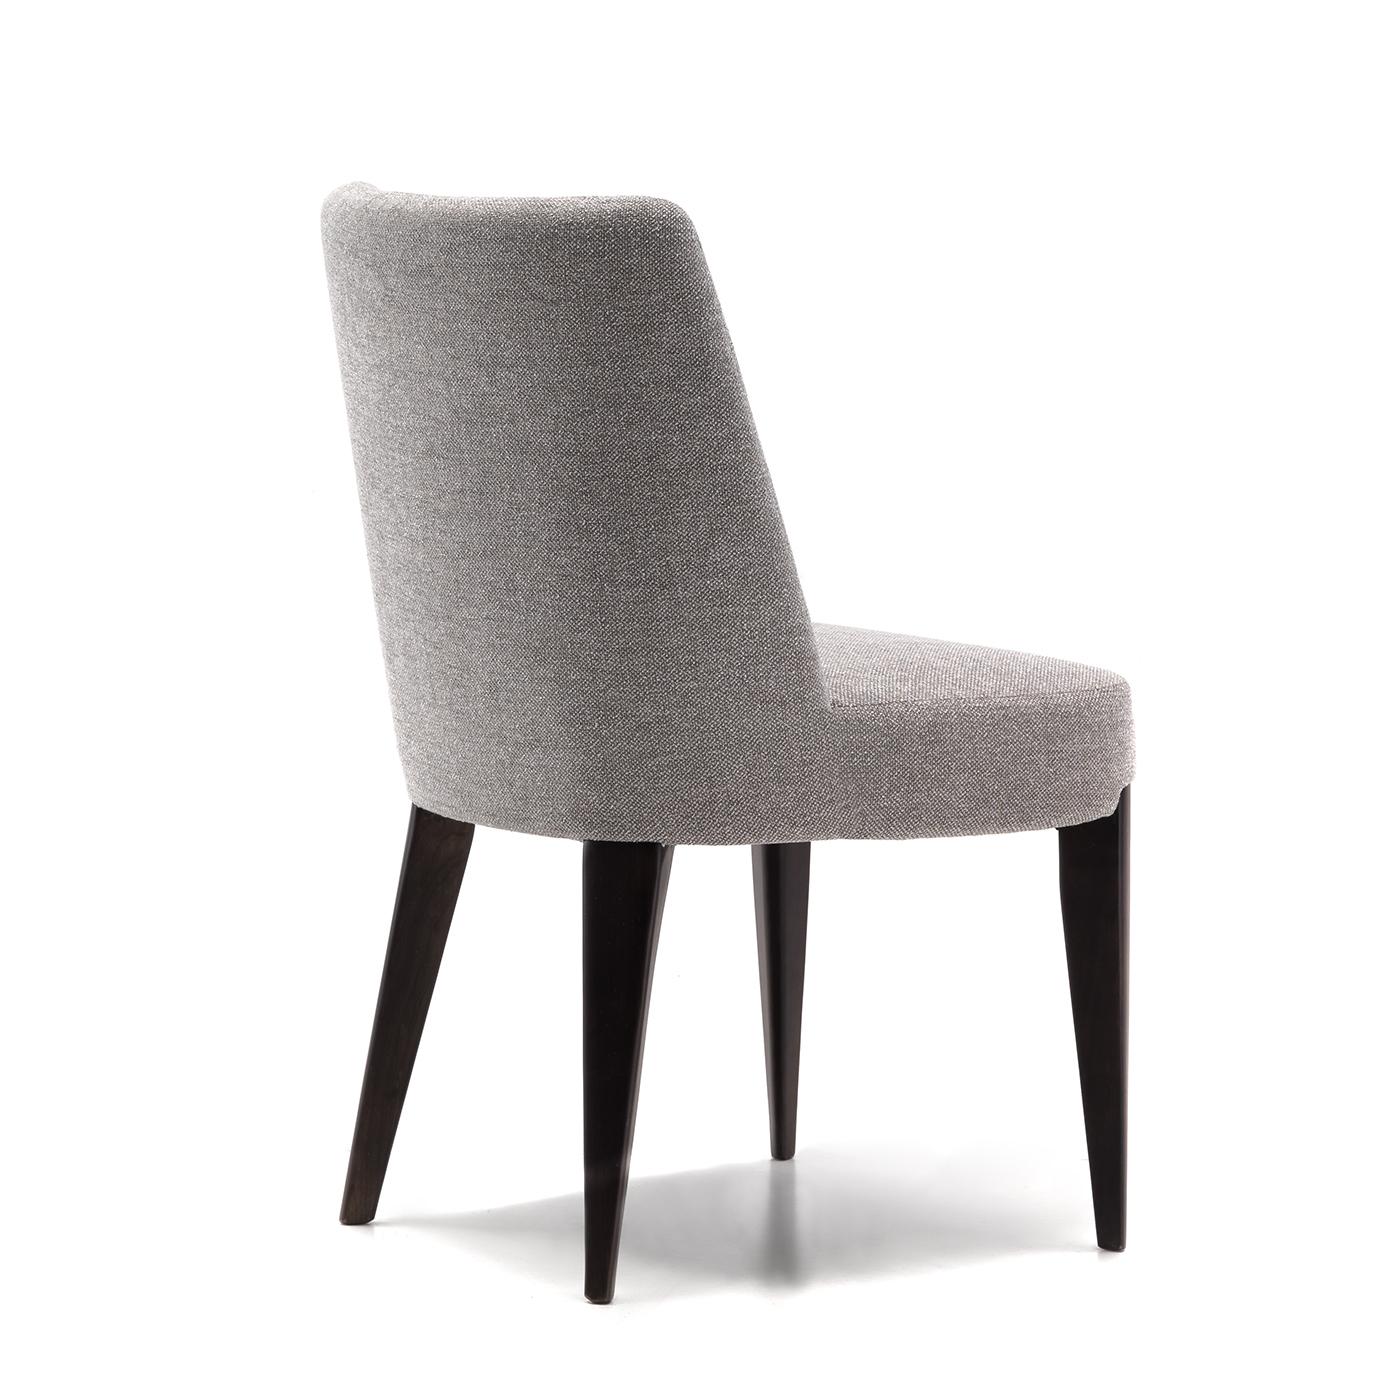 A versatile, clean look defines this exquisite chair by Giovanna Azzarello, whose sturdy structure in solid cherry flaunts an alluring, satin ebony finish. The ideal choice to complement modern tables with understated elegance, the design showcases